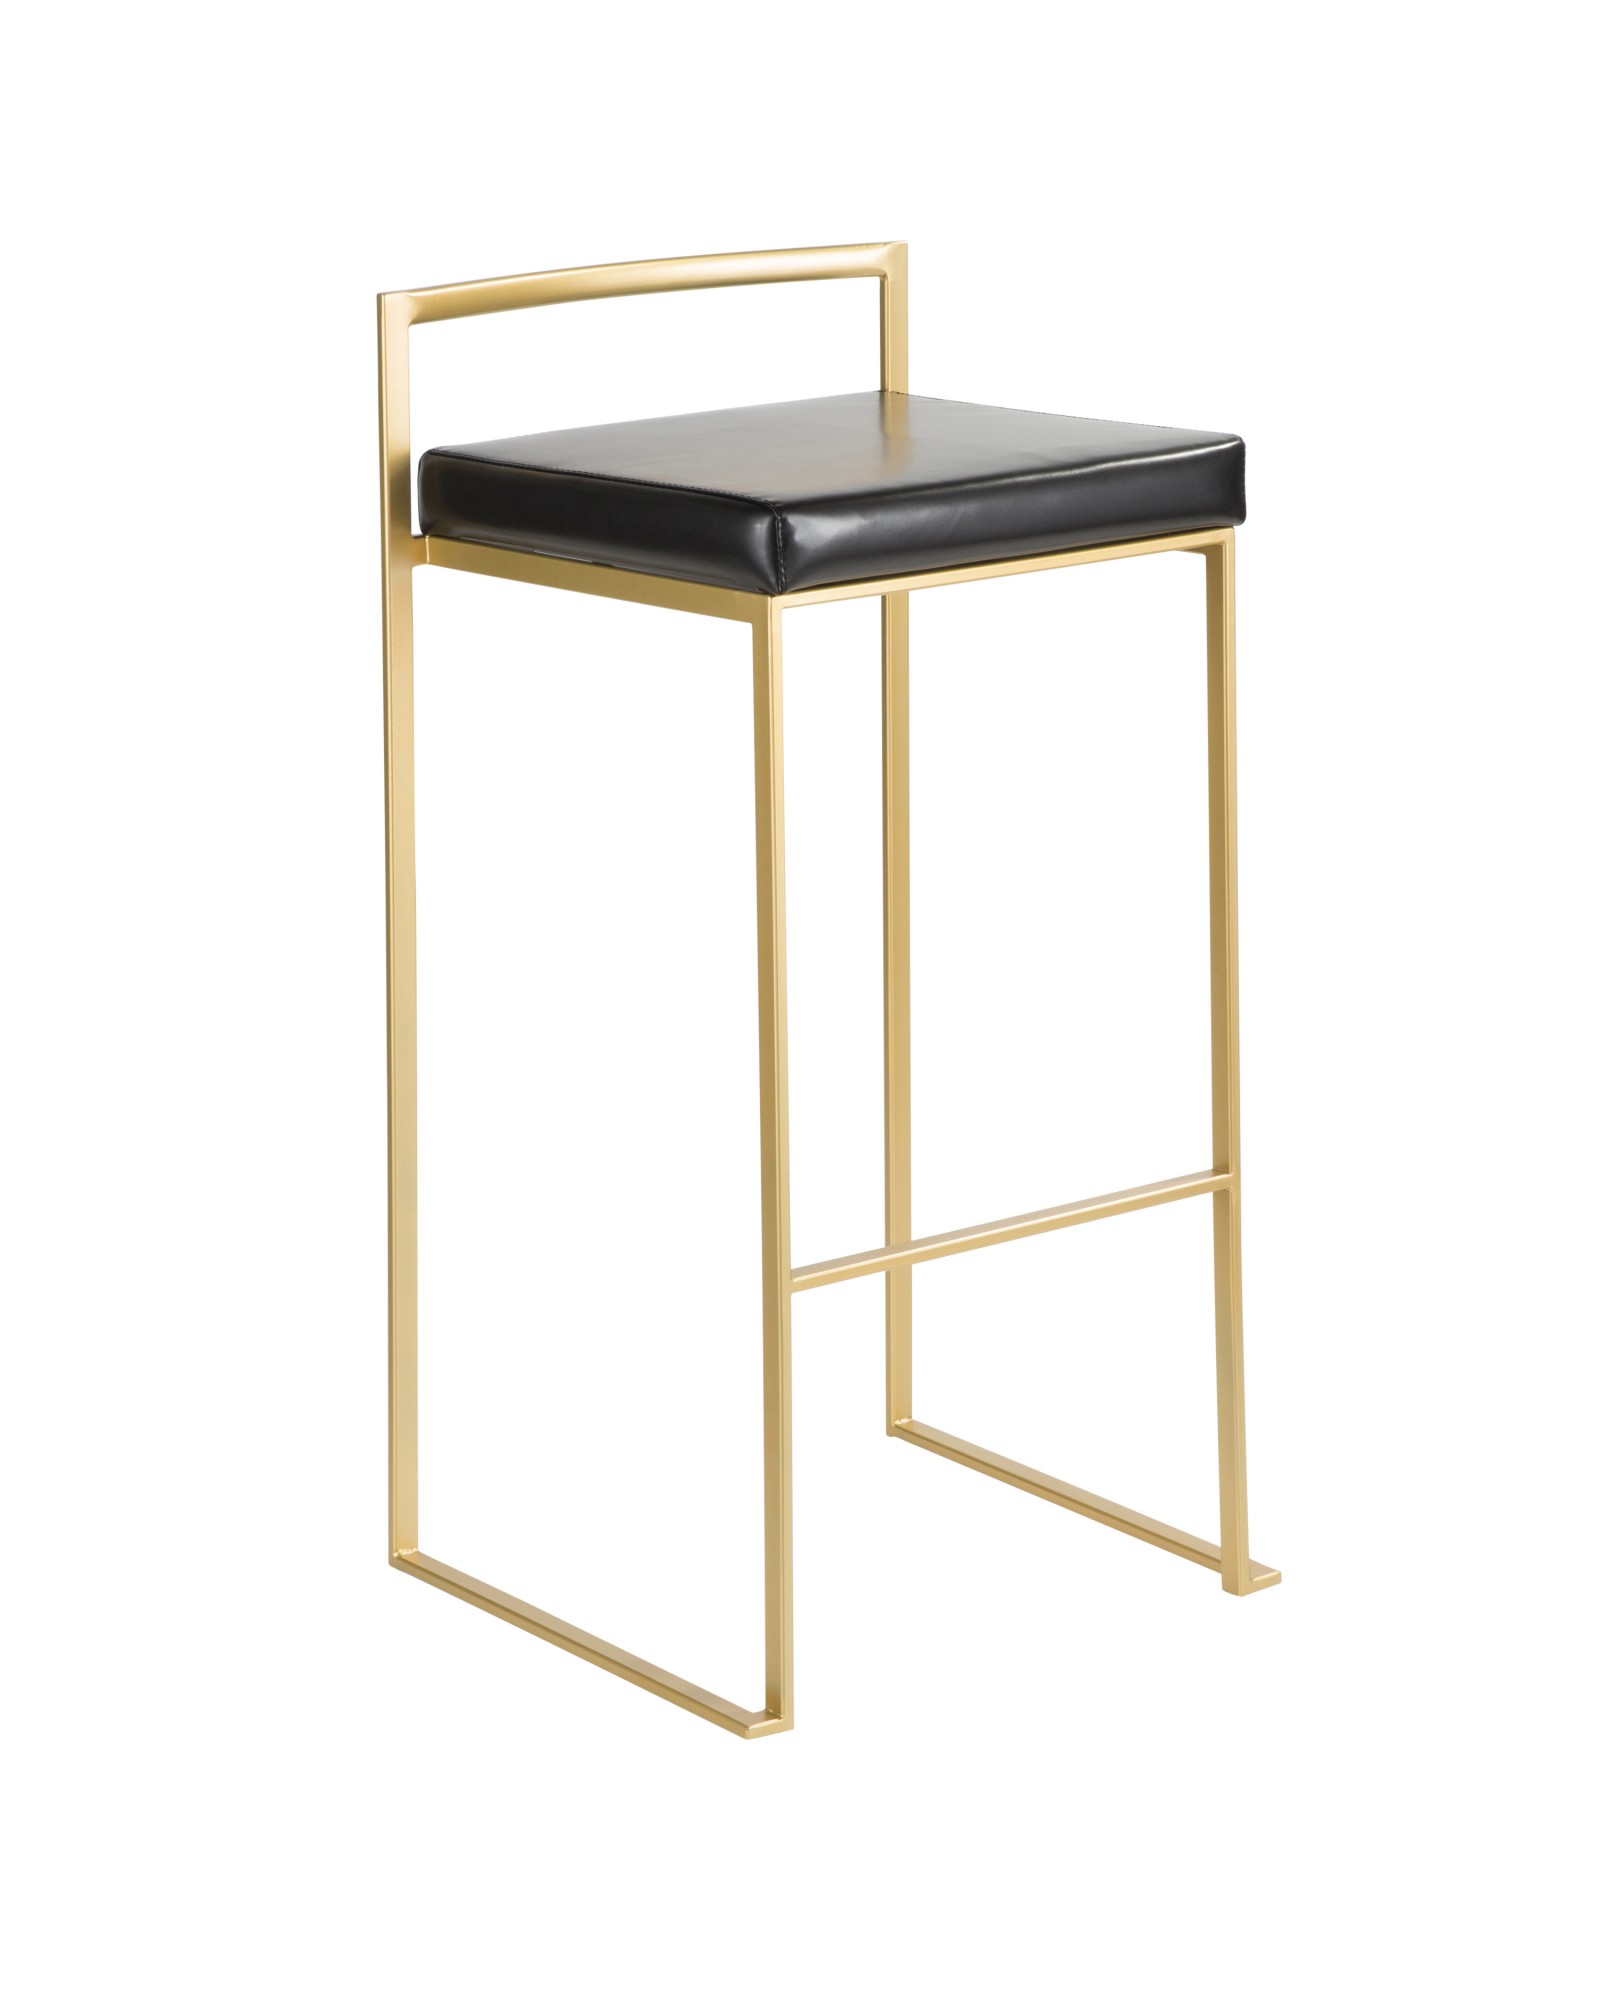 Fuji Contemporary-Glam Barstool in Gold with Black Faux Leather - Set of 2